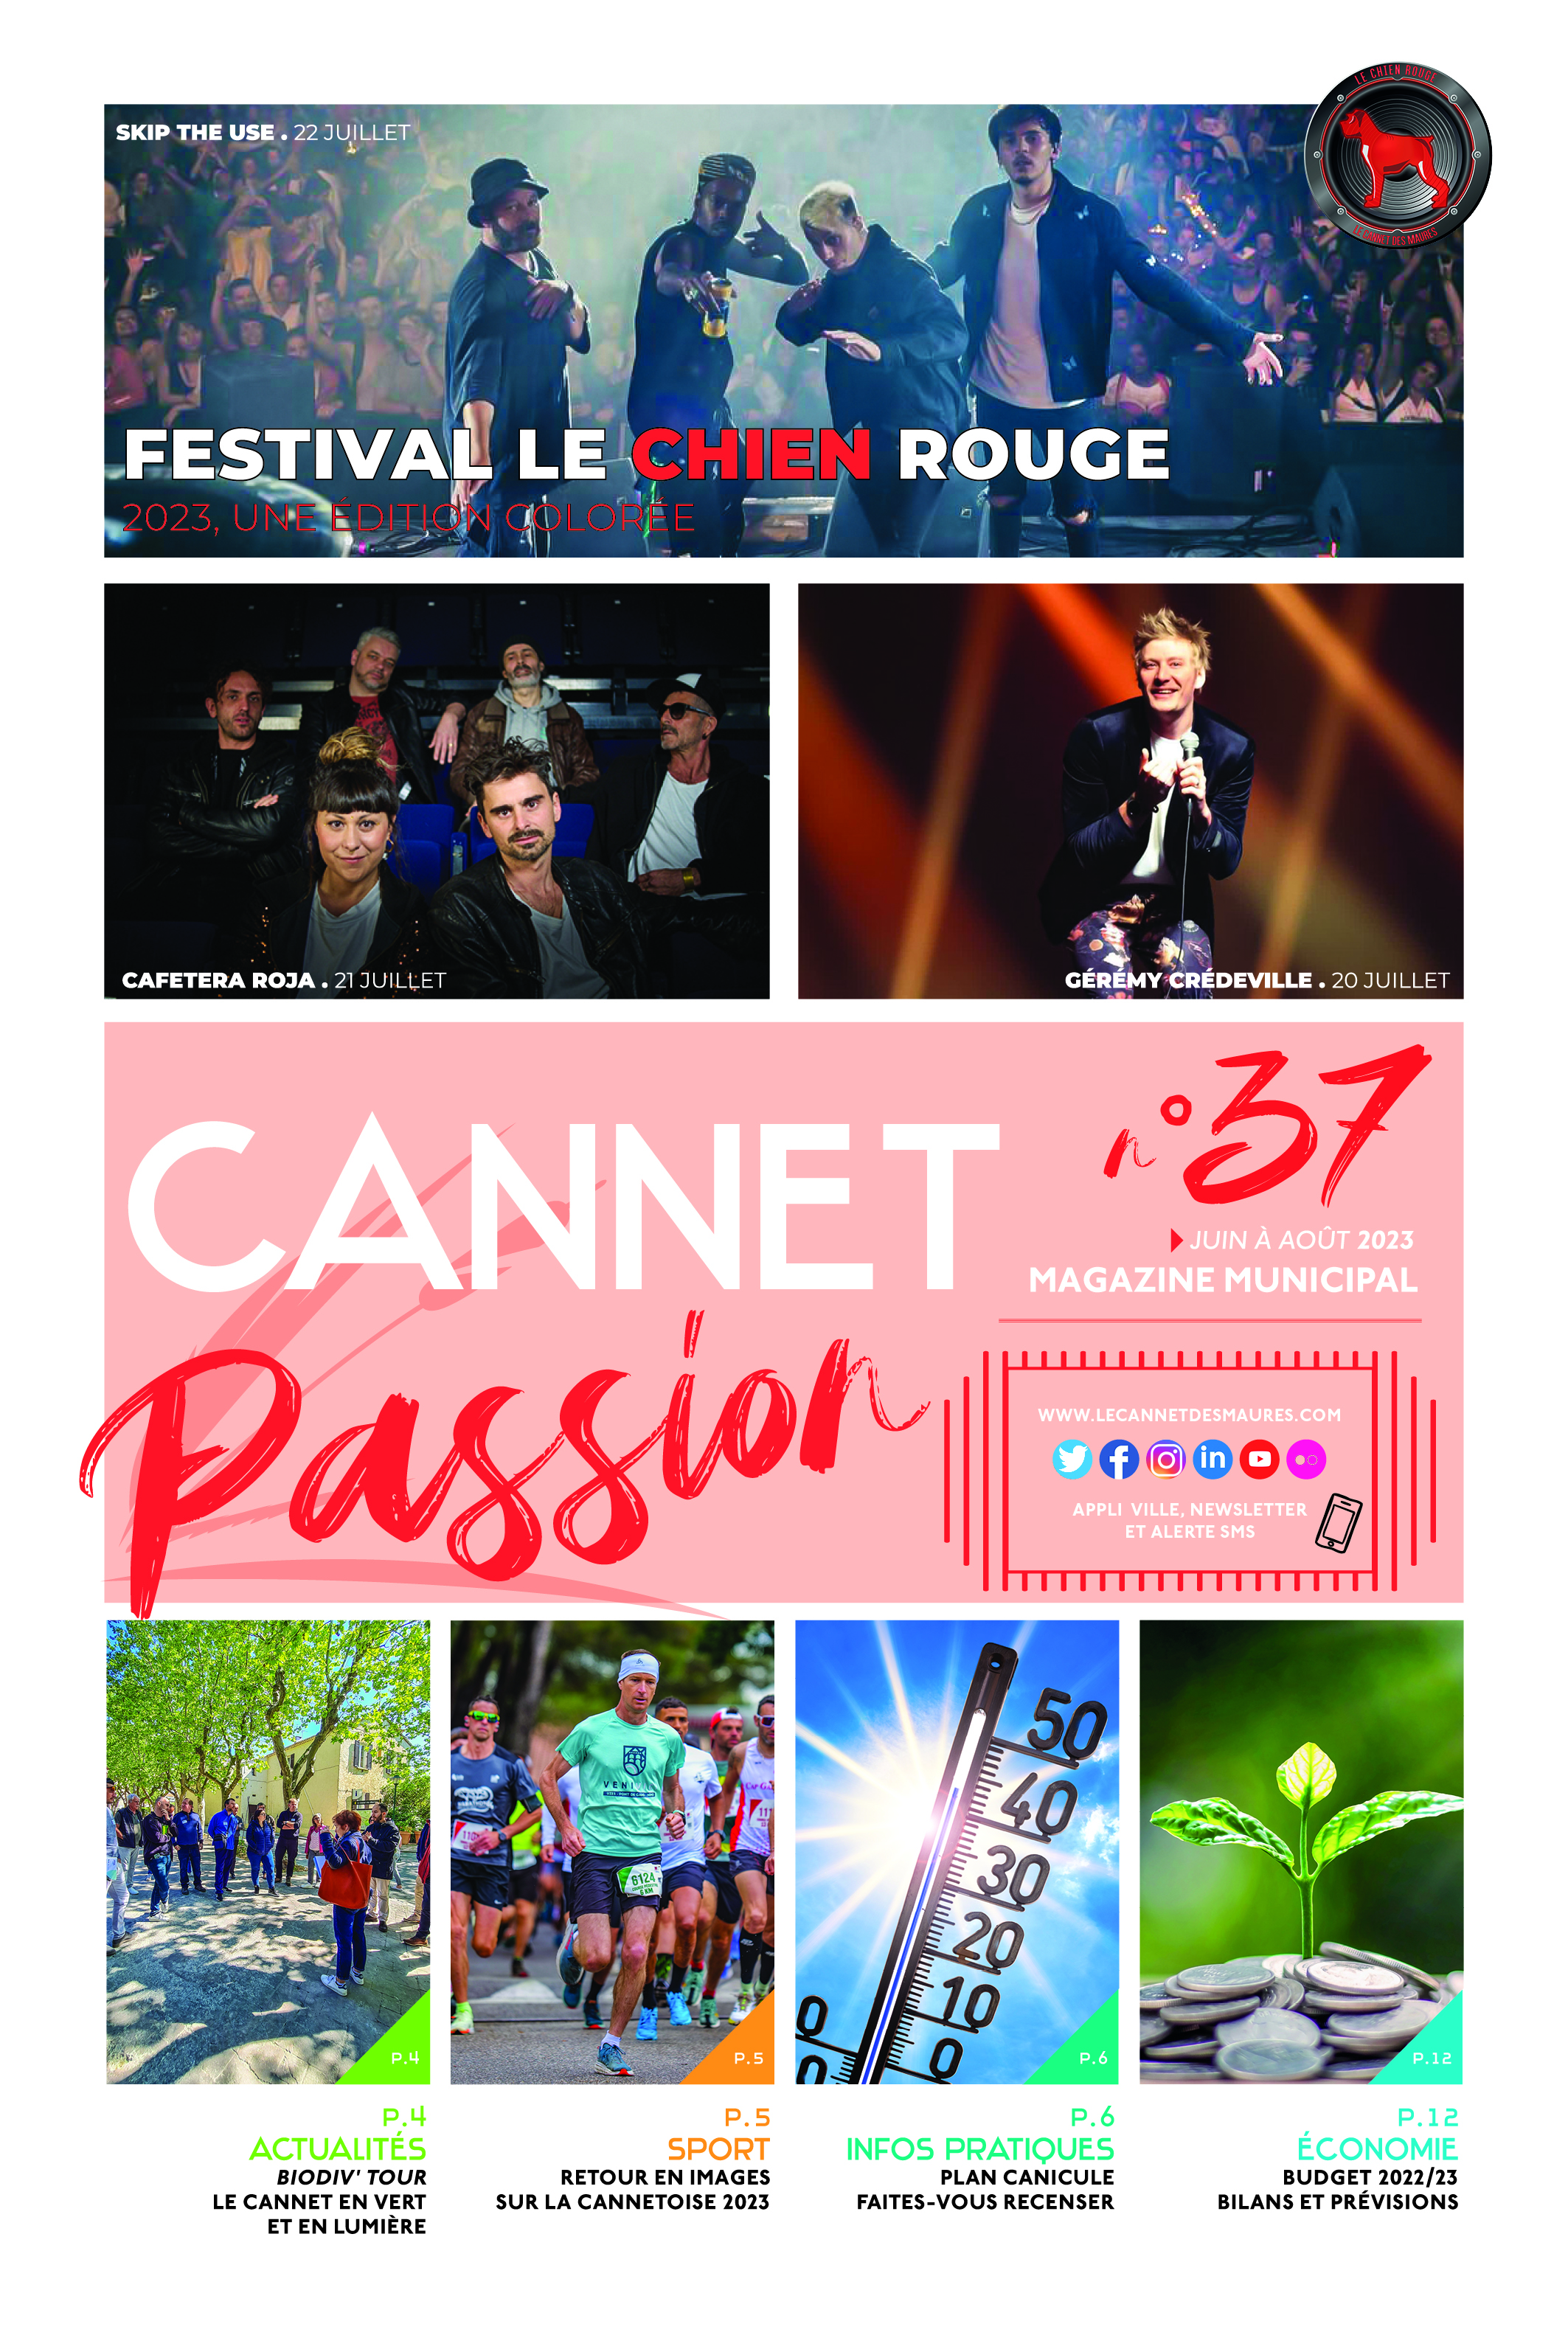 Cannet Passion n°37